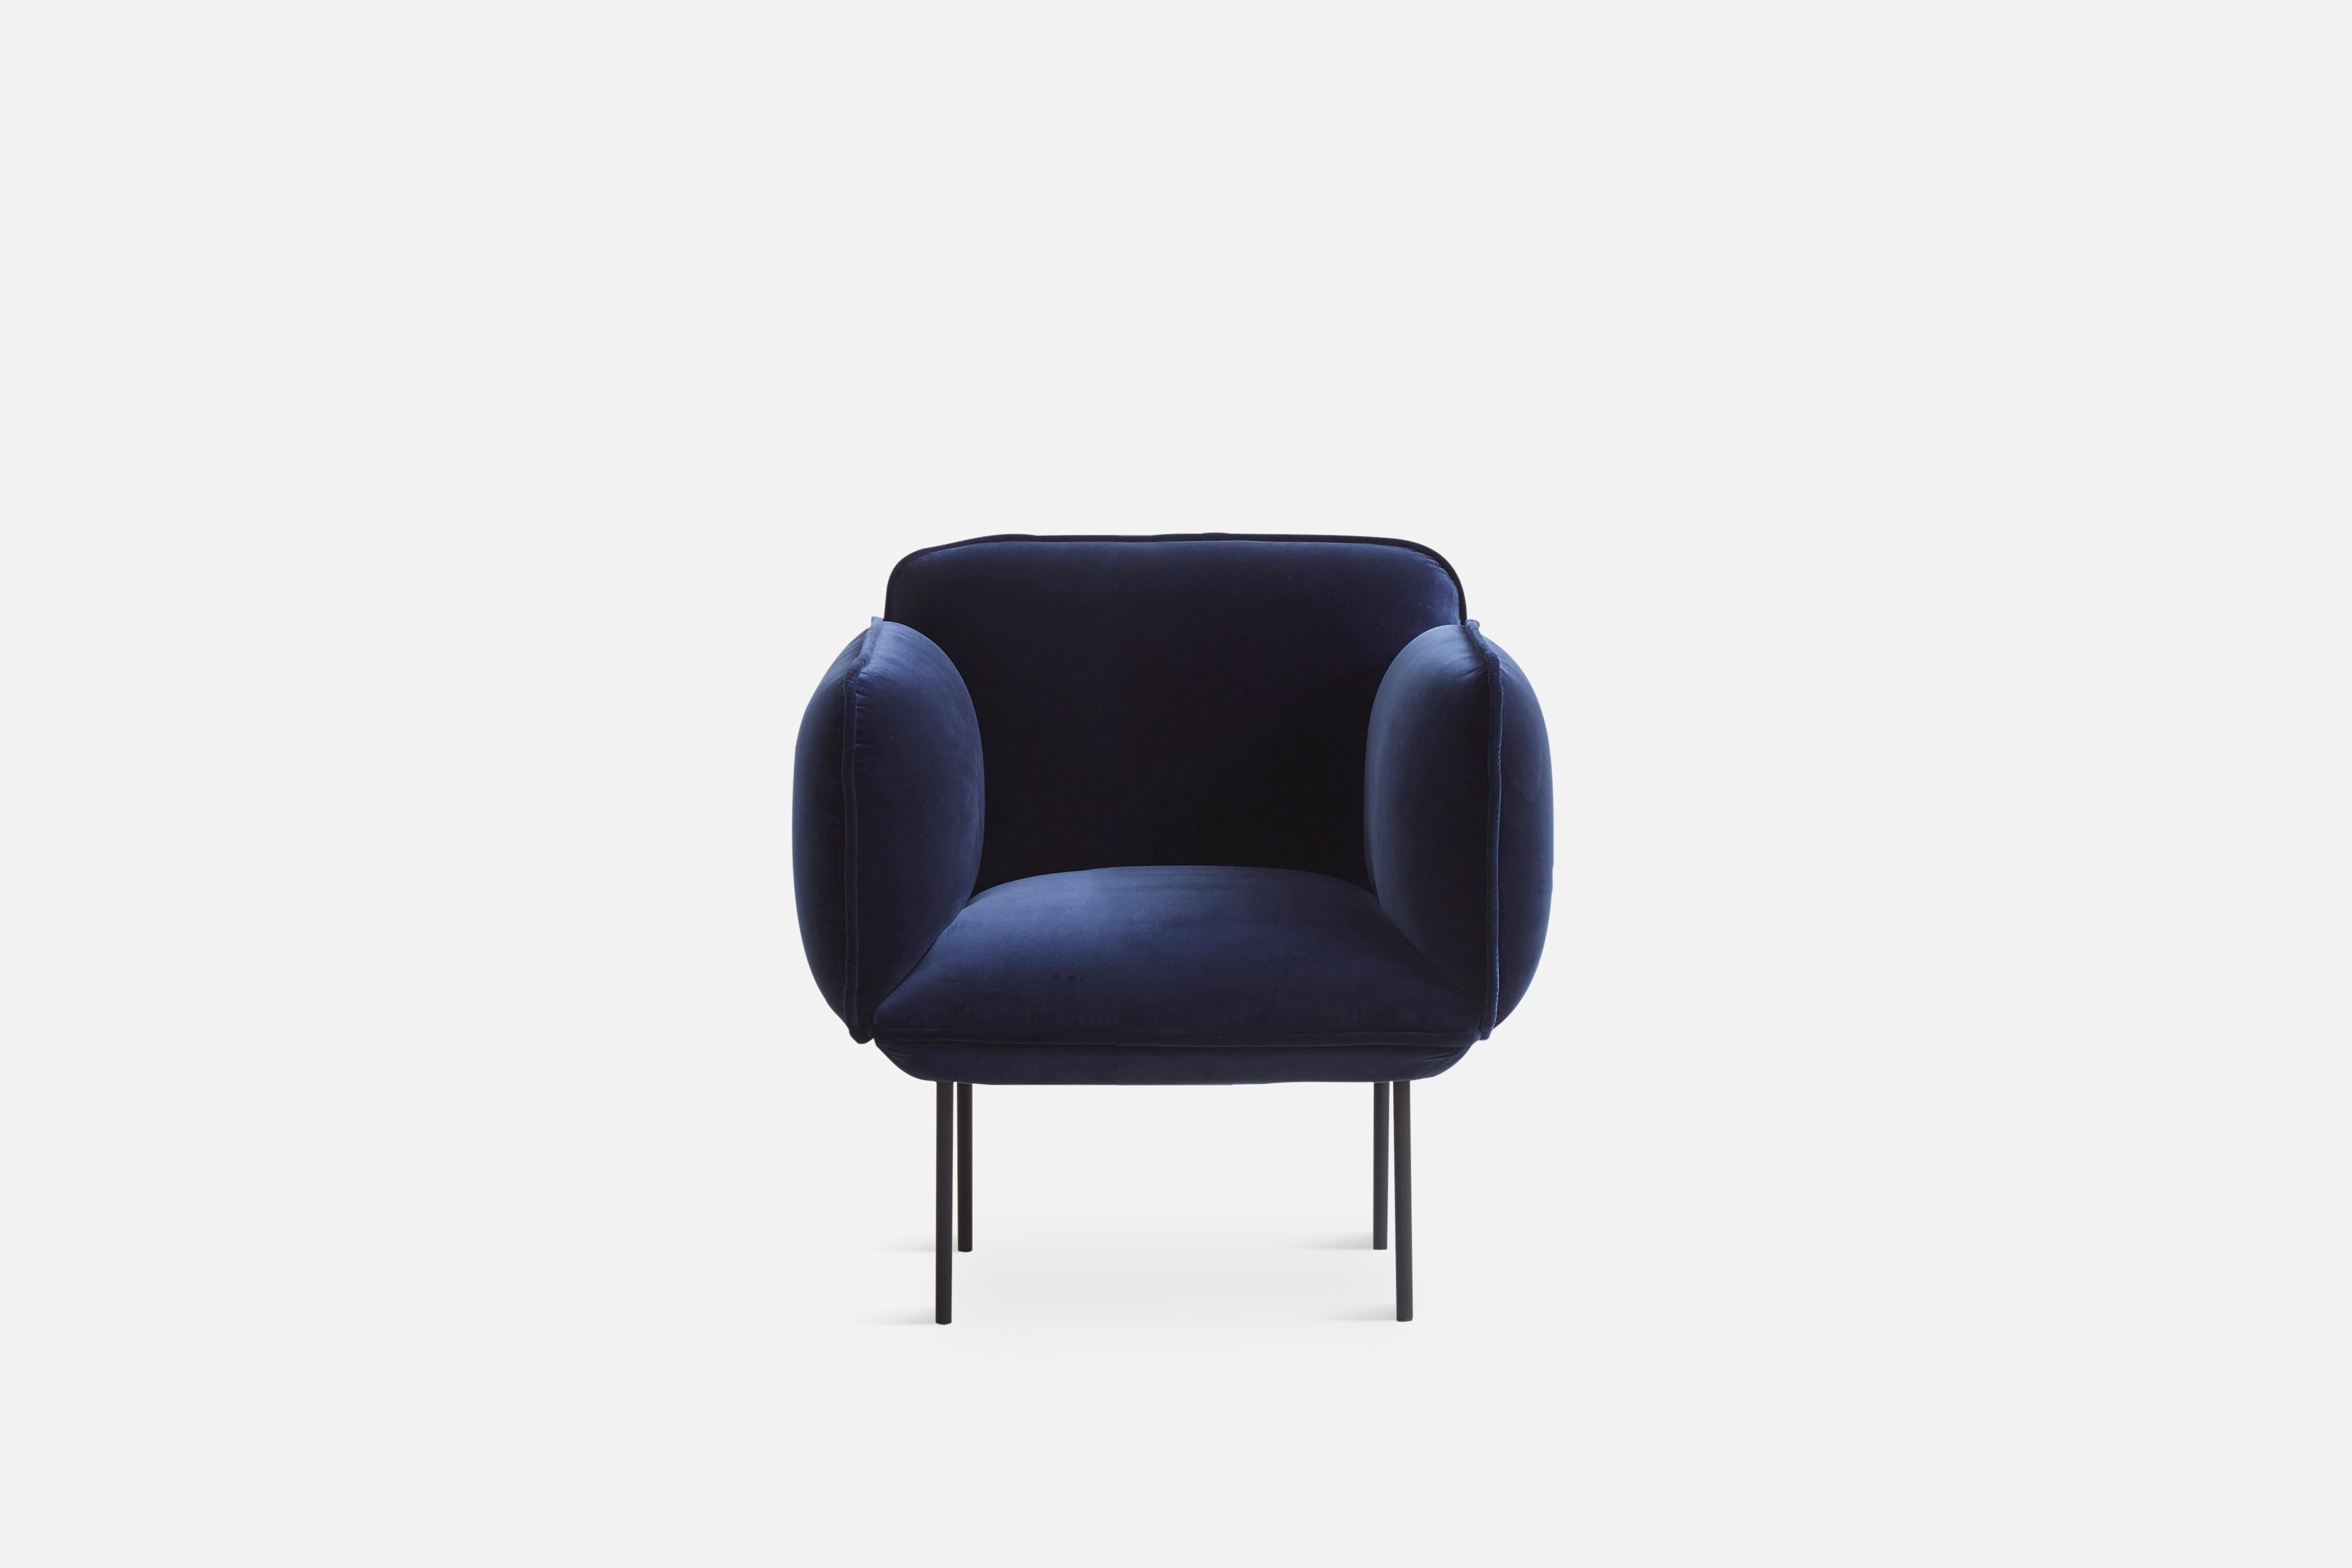 Nakki armchair by Mika Tolvanen
Materials: Foam, Plywood, Elastic Belts, Memory Foam, Fabric (harald 3, 0182)
Dimensions: D 75 x W 85 x H 83 cm
Also available in different colours and materials. 

The founders, Mia and Torben Koed, decided to